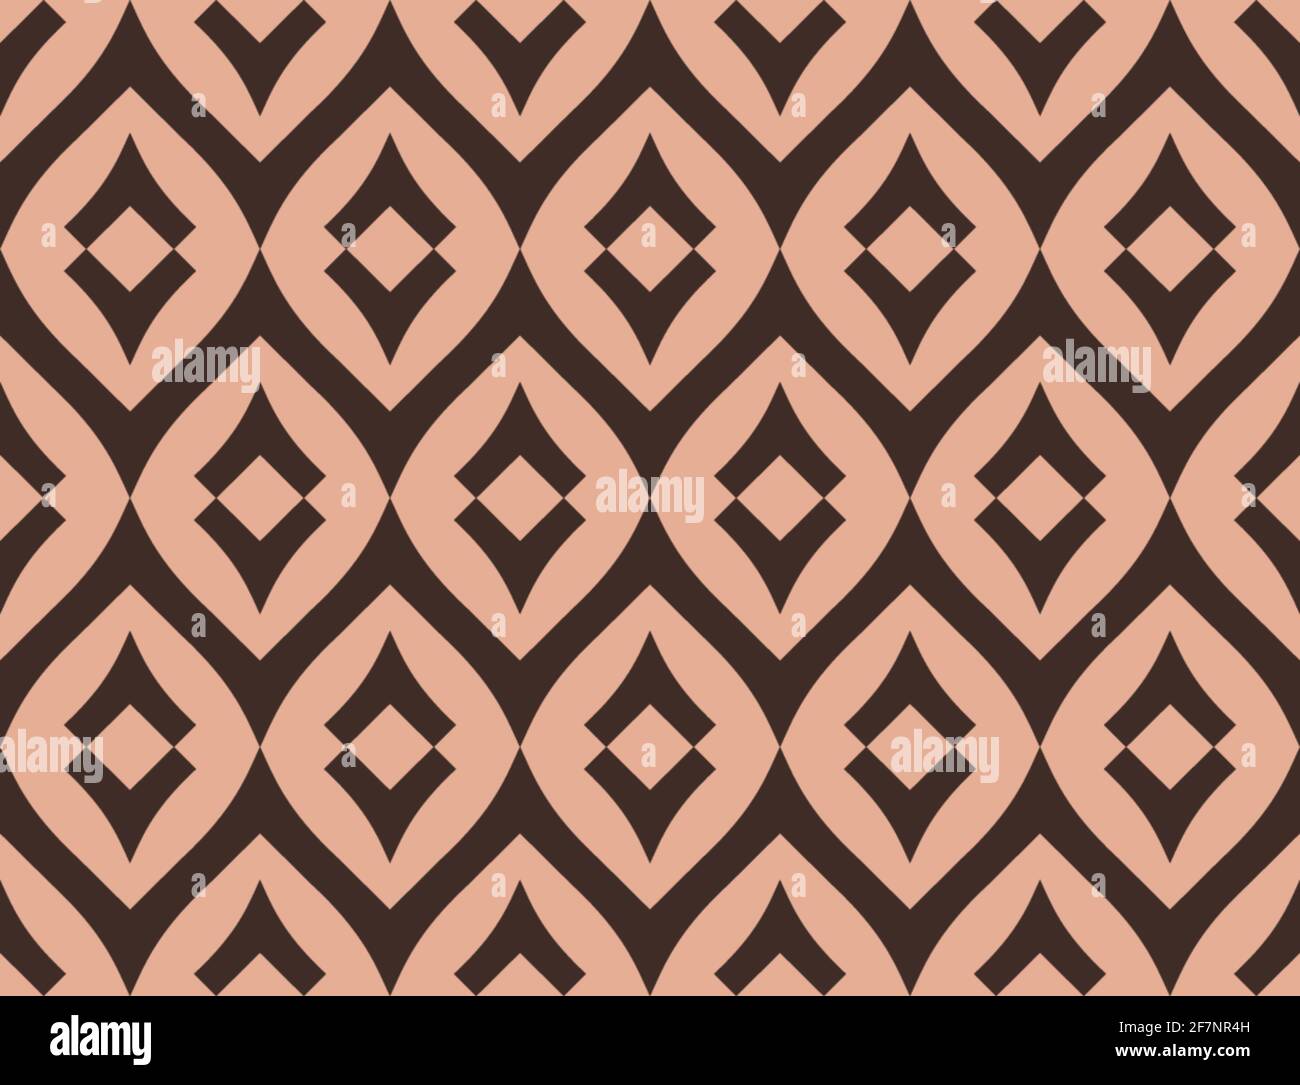 Earthy brown curved V-shaped chevron ogee vector surface pattern for printed paper items, web design, branding, packaging, interior objects, scrapbook Stock Vector